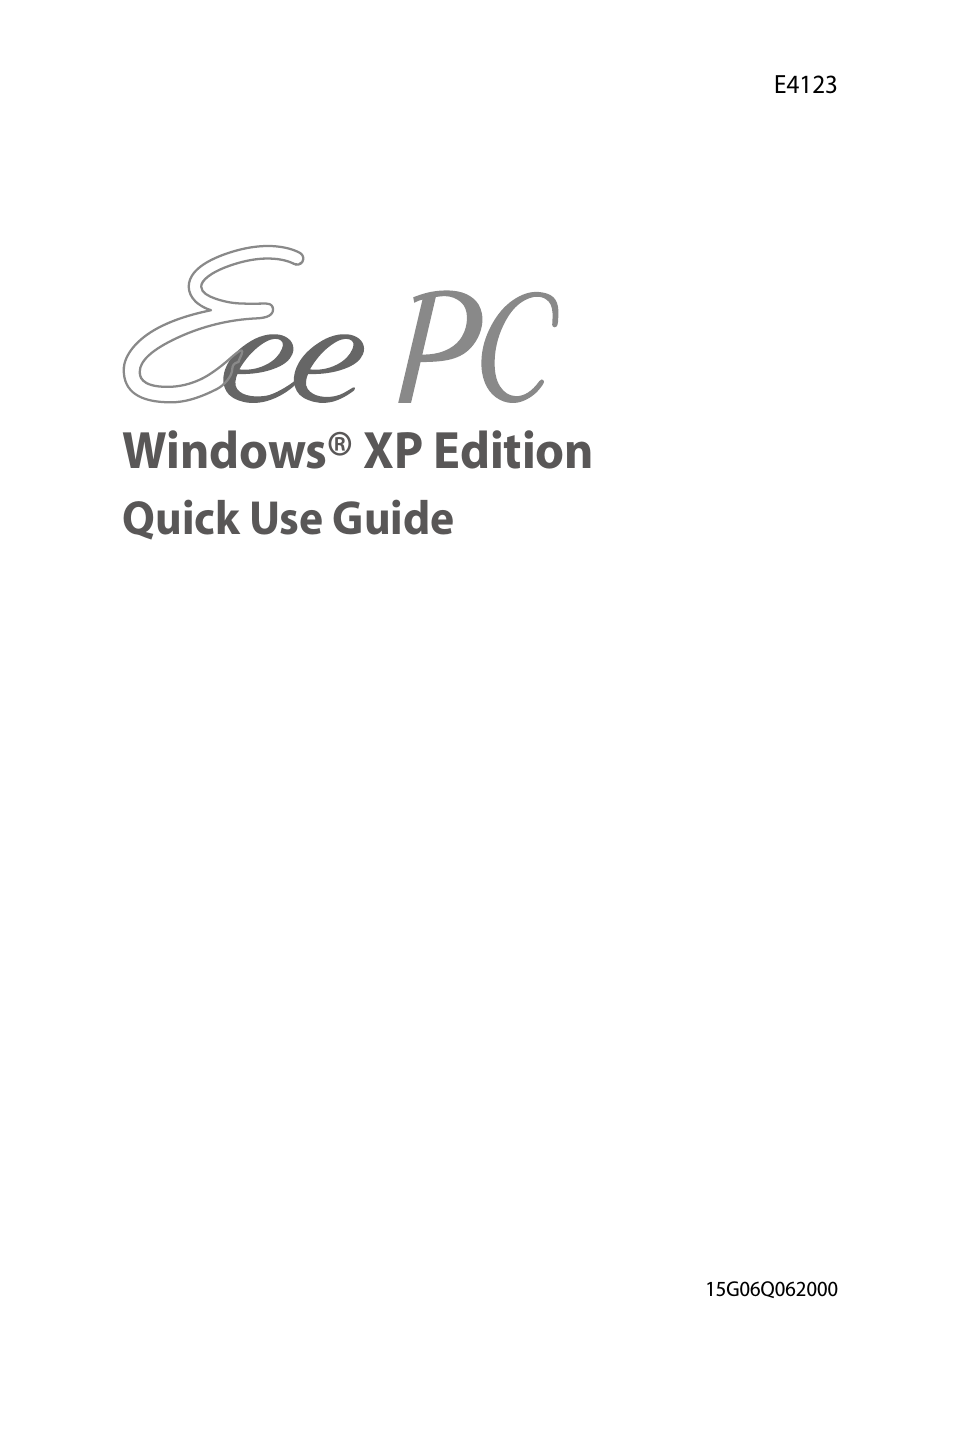 Eee PC 900A/XP (Page 1)